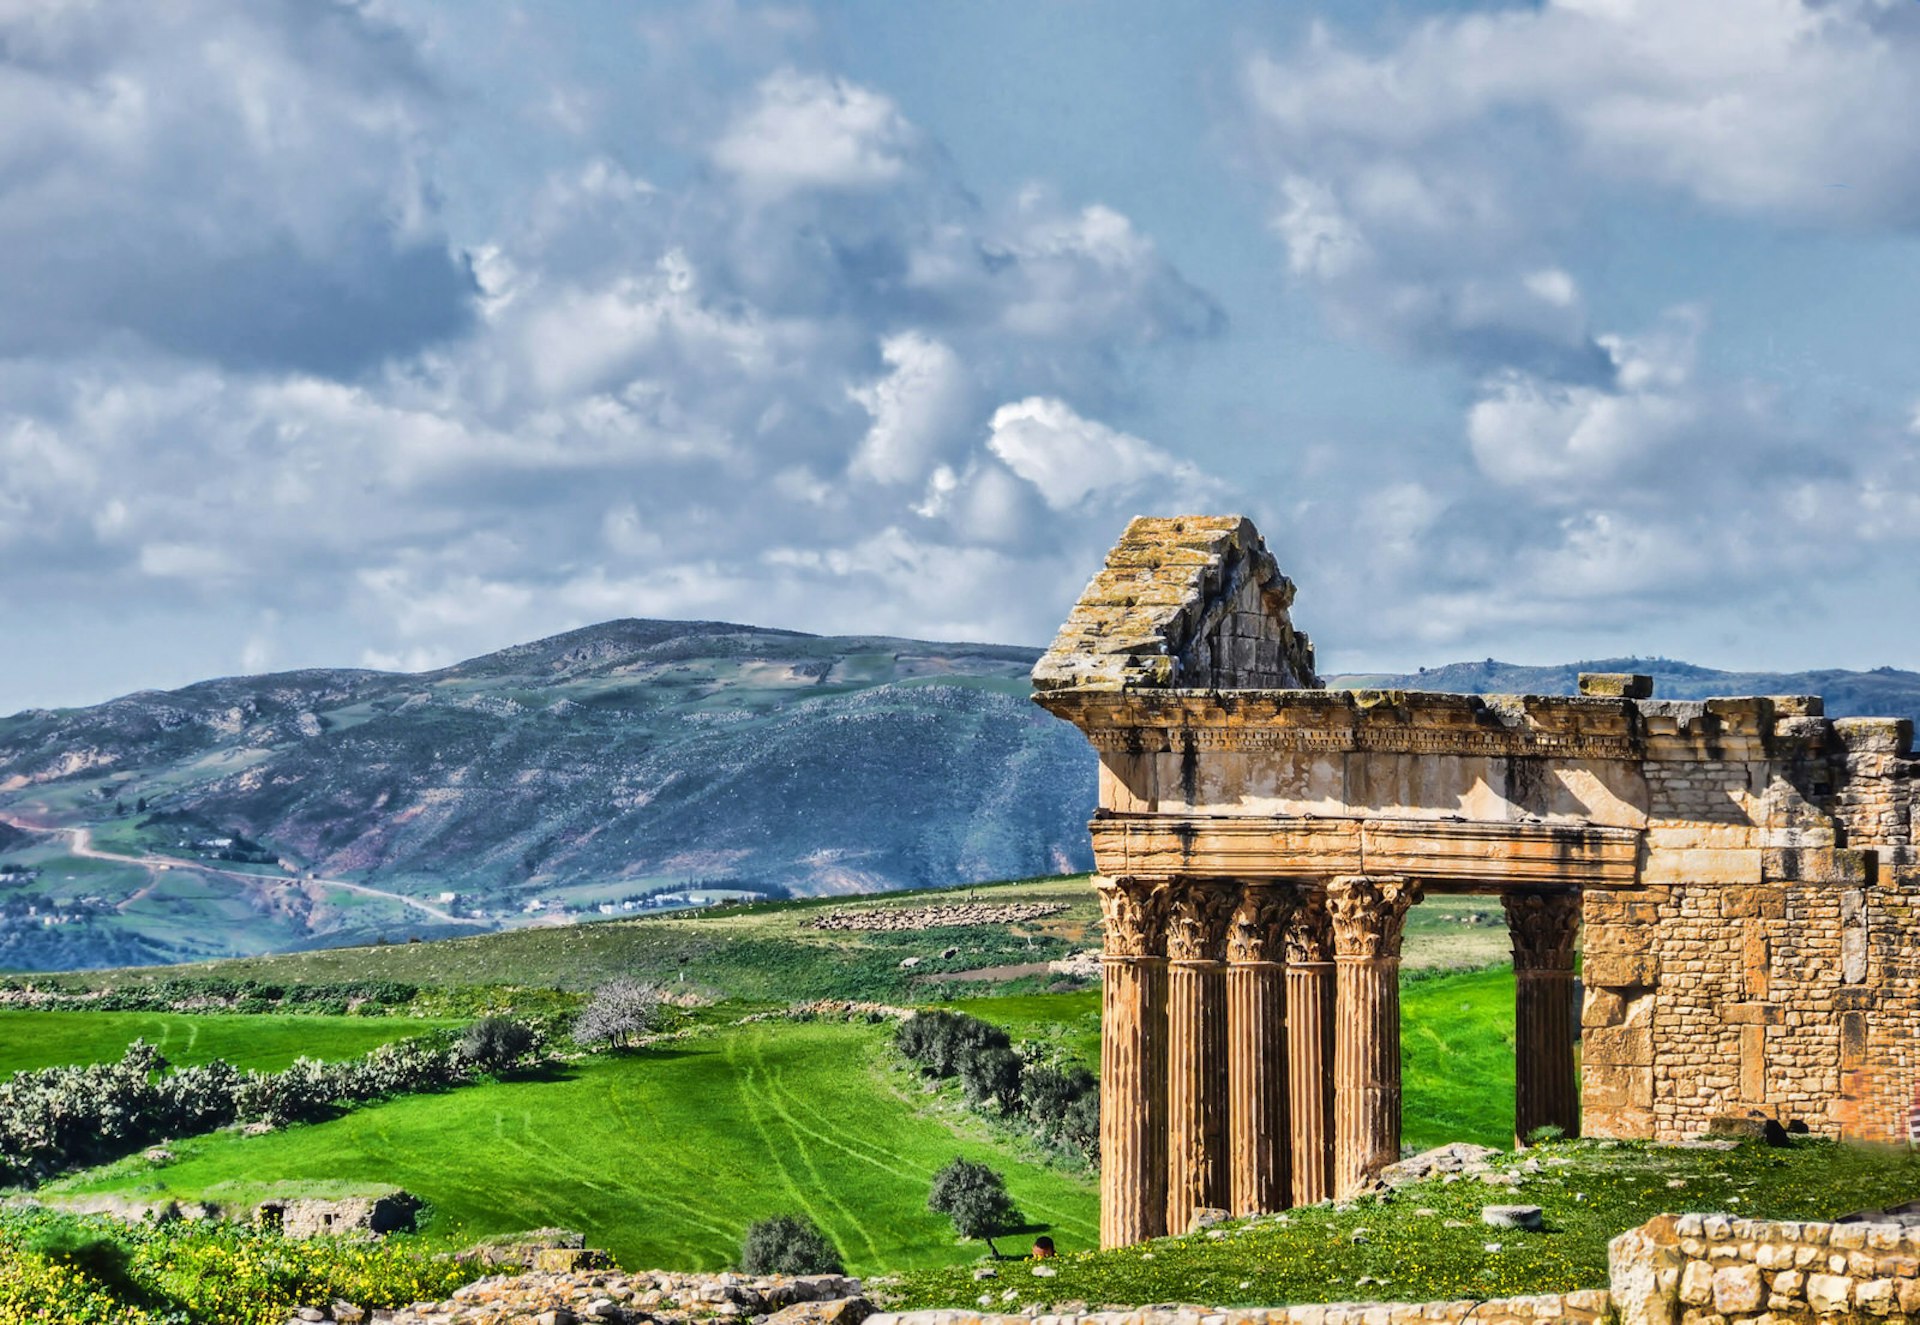 View of the Roman Temple of Jupiter at the archaeological site of Dougga, with mountains in the background © Rosita So Image / Getty Images